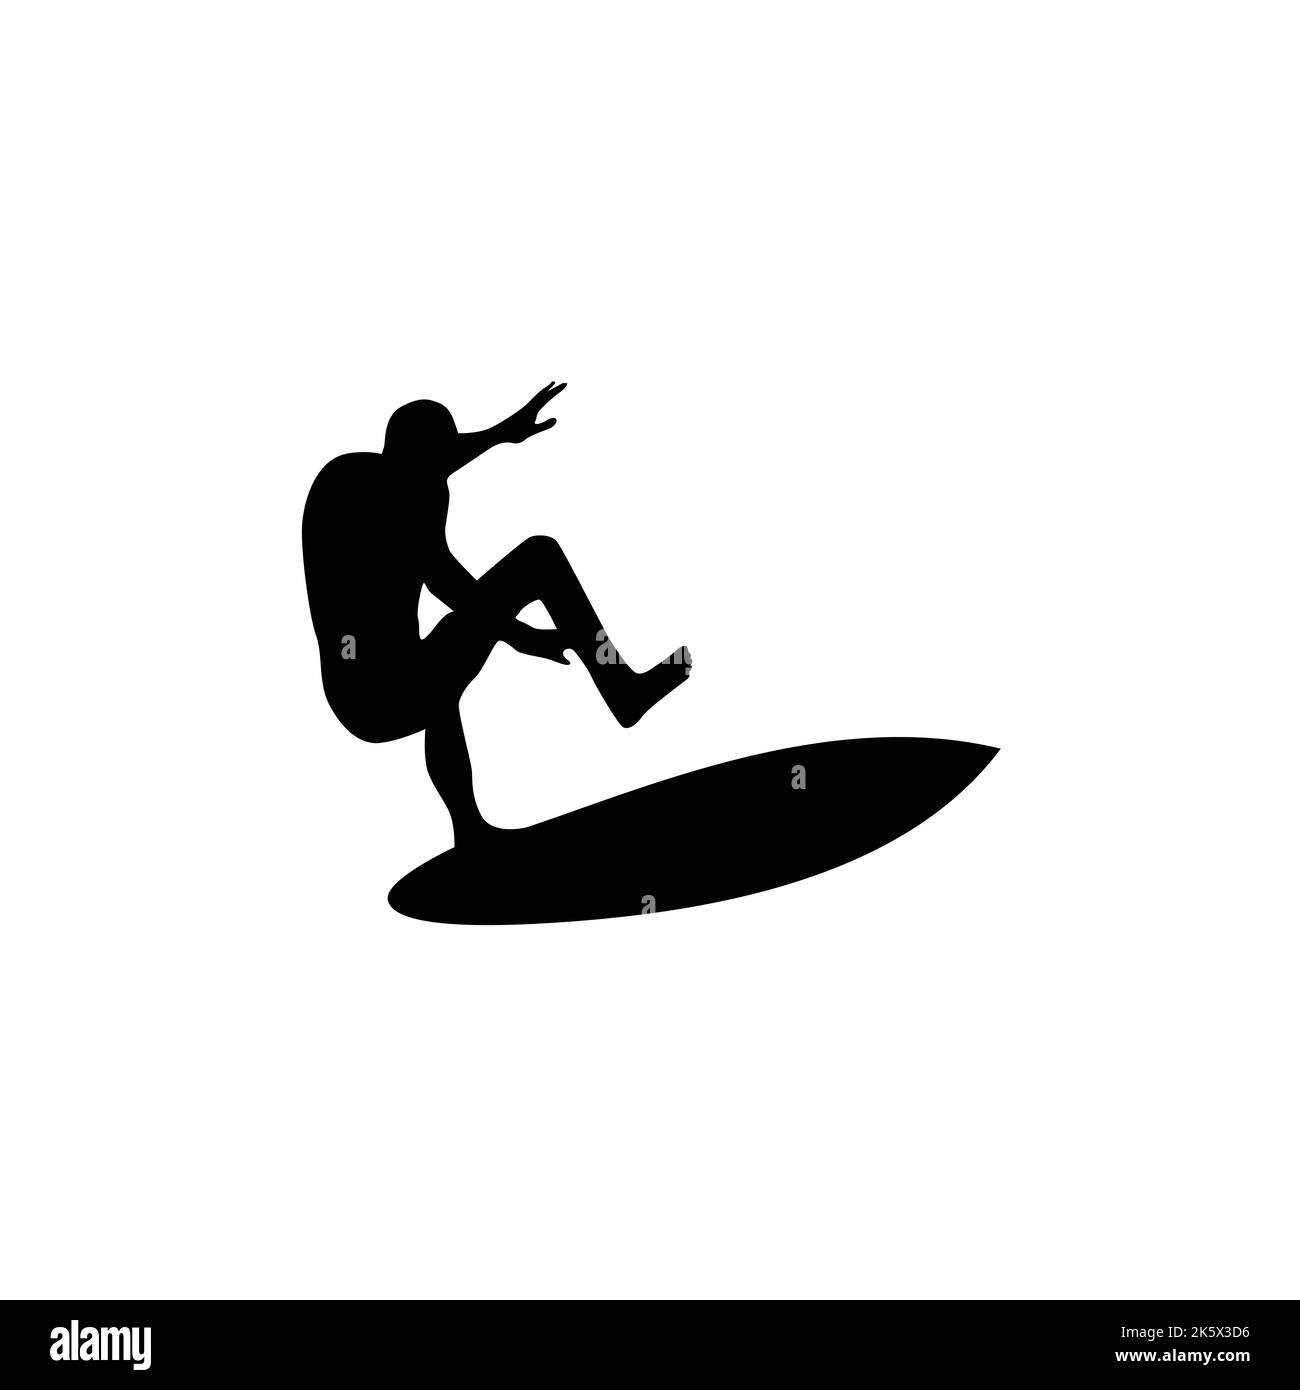 Silhouette of a surfer vector image Stock Vector